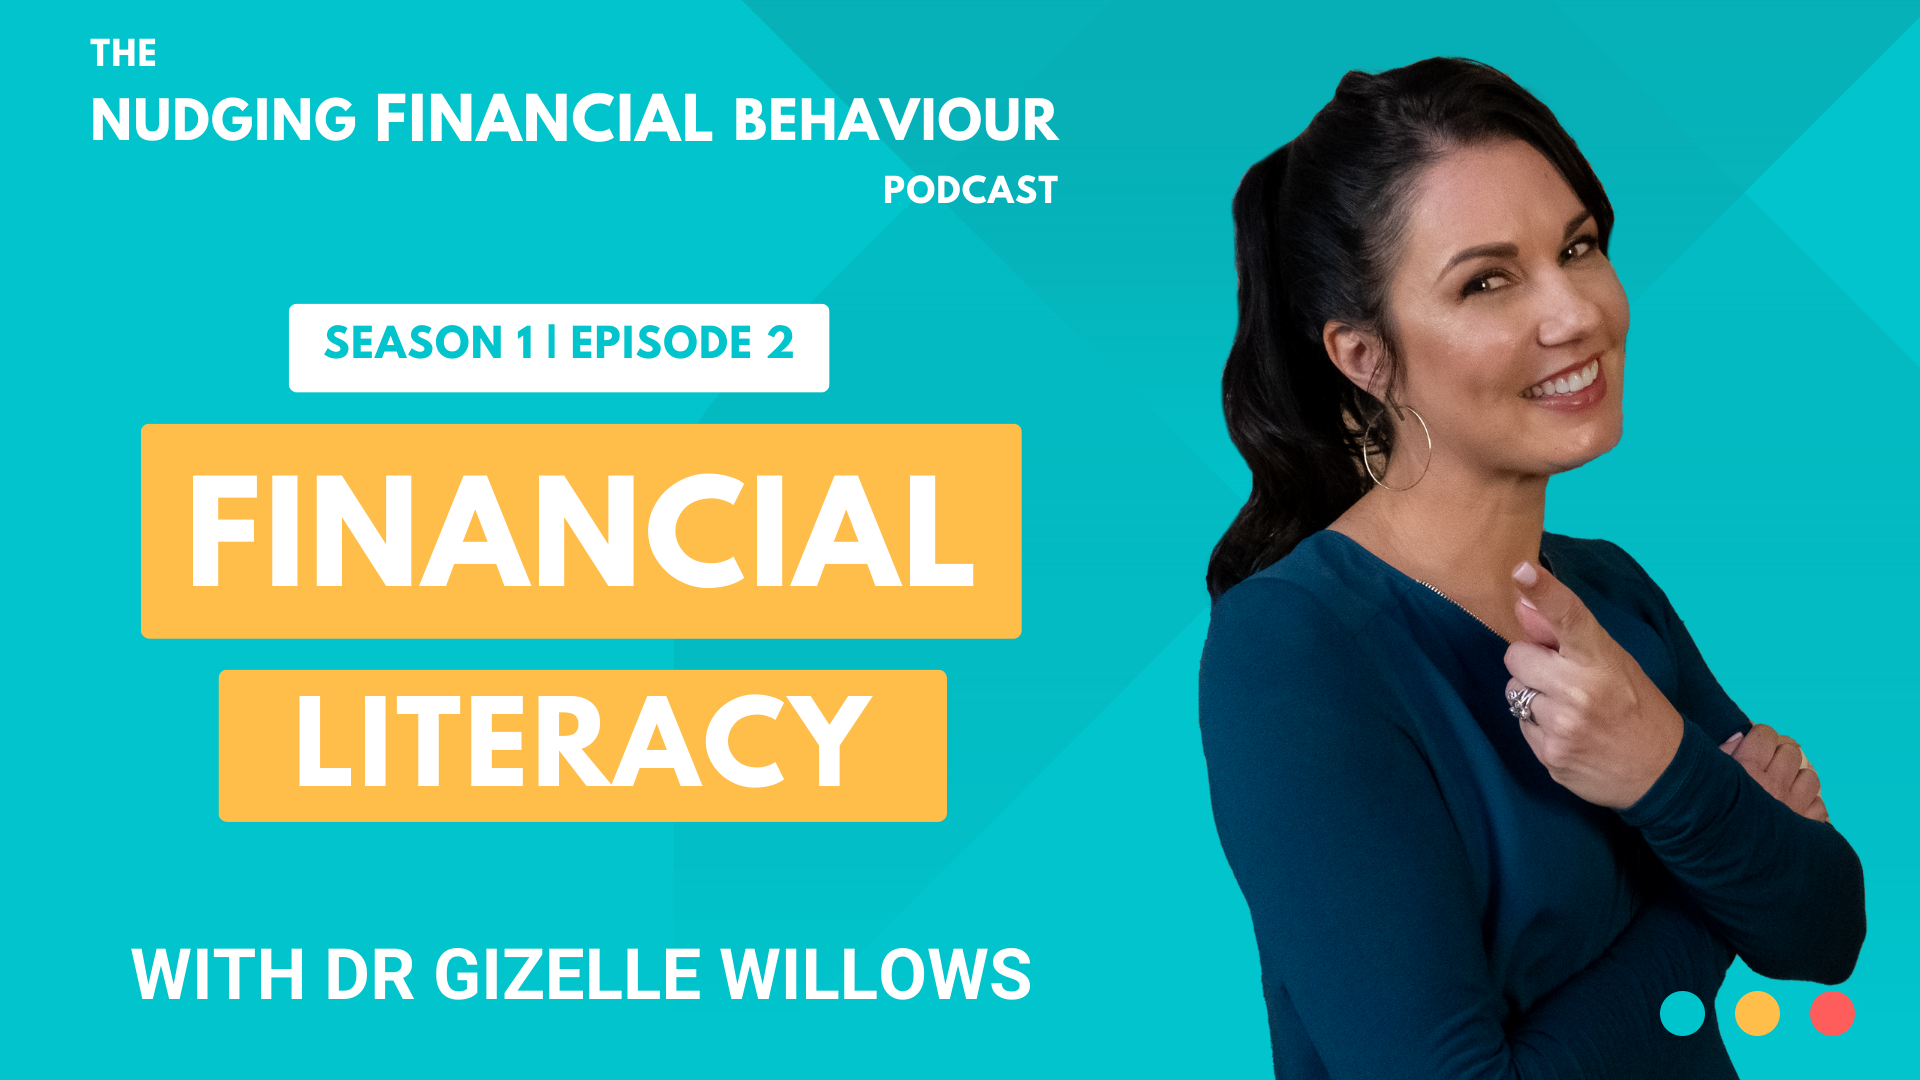 Financial literacy on the Nudging Financial Behaviour podcast